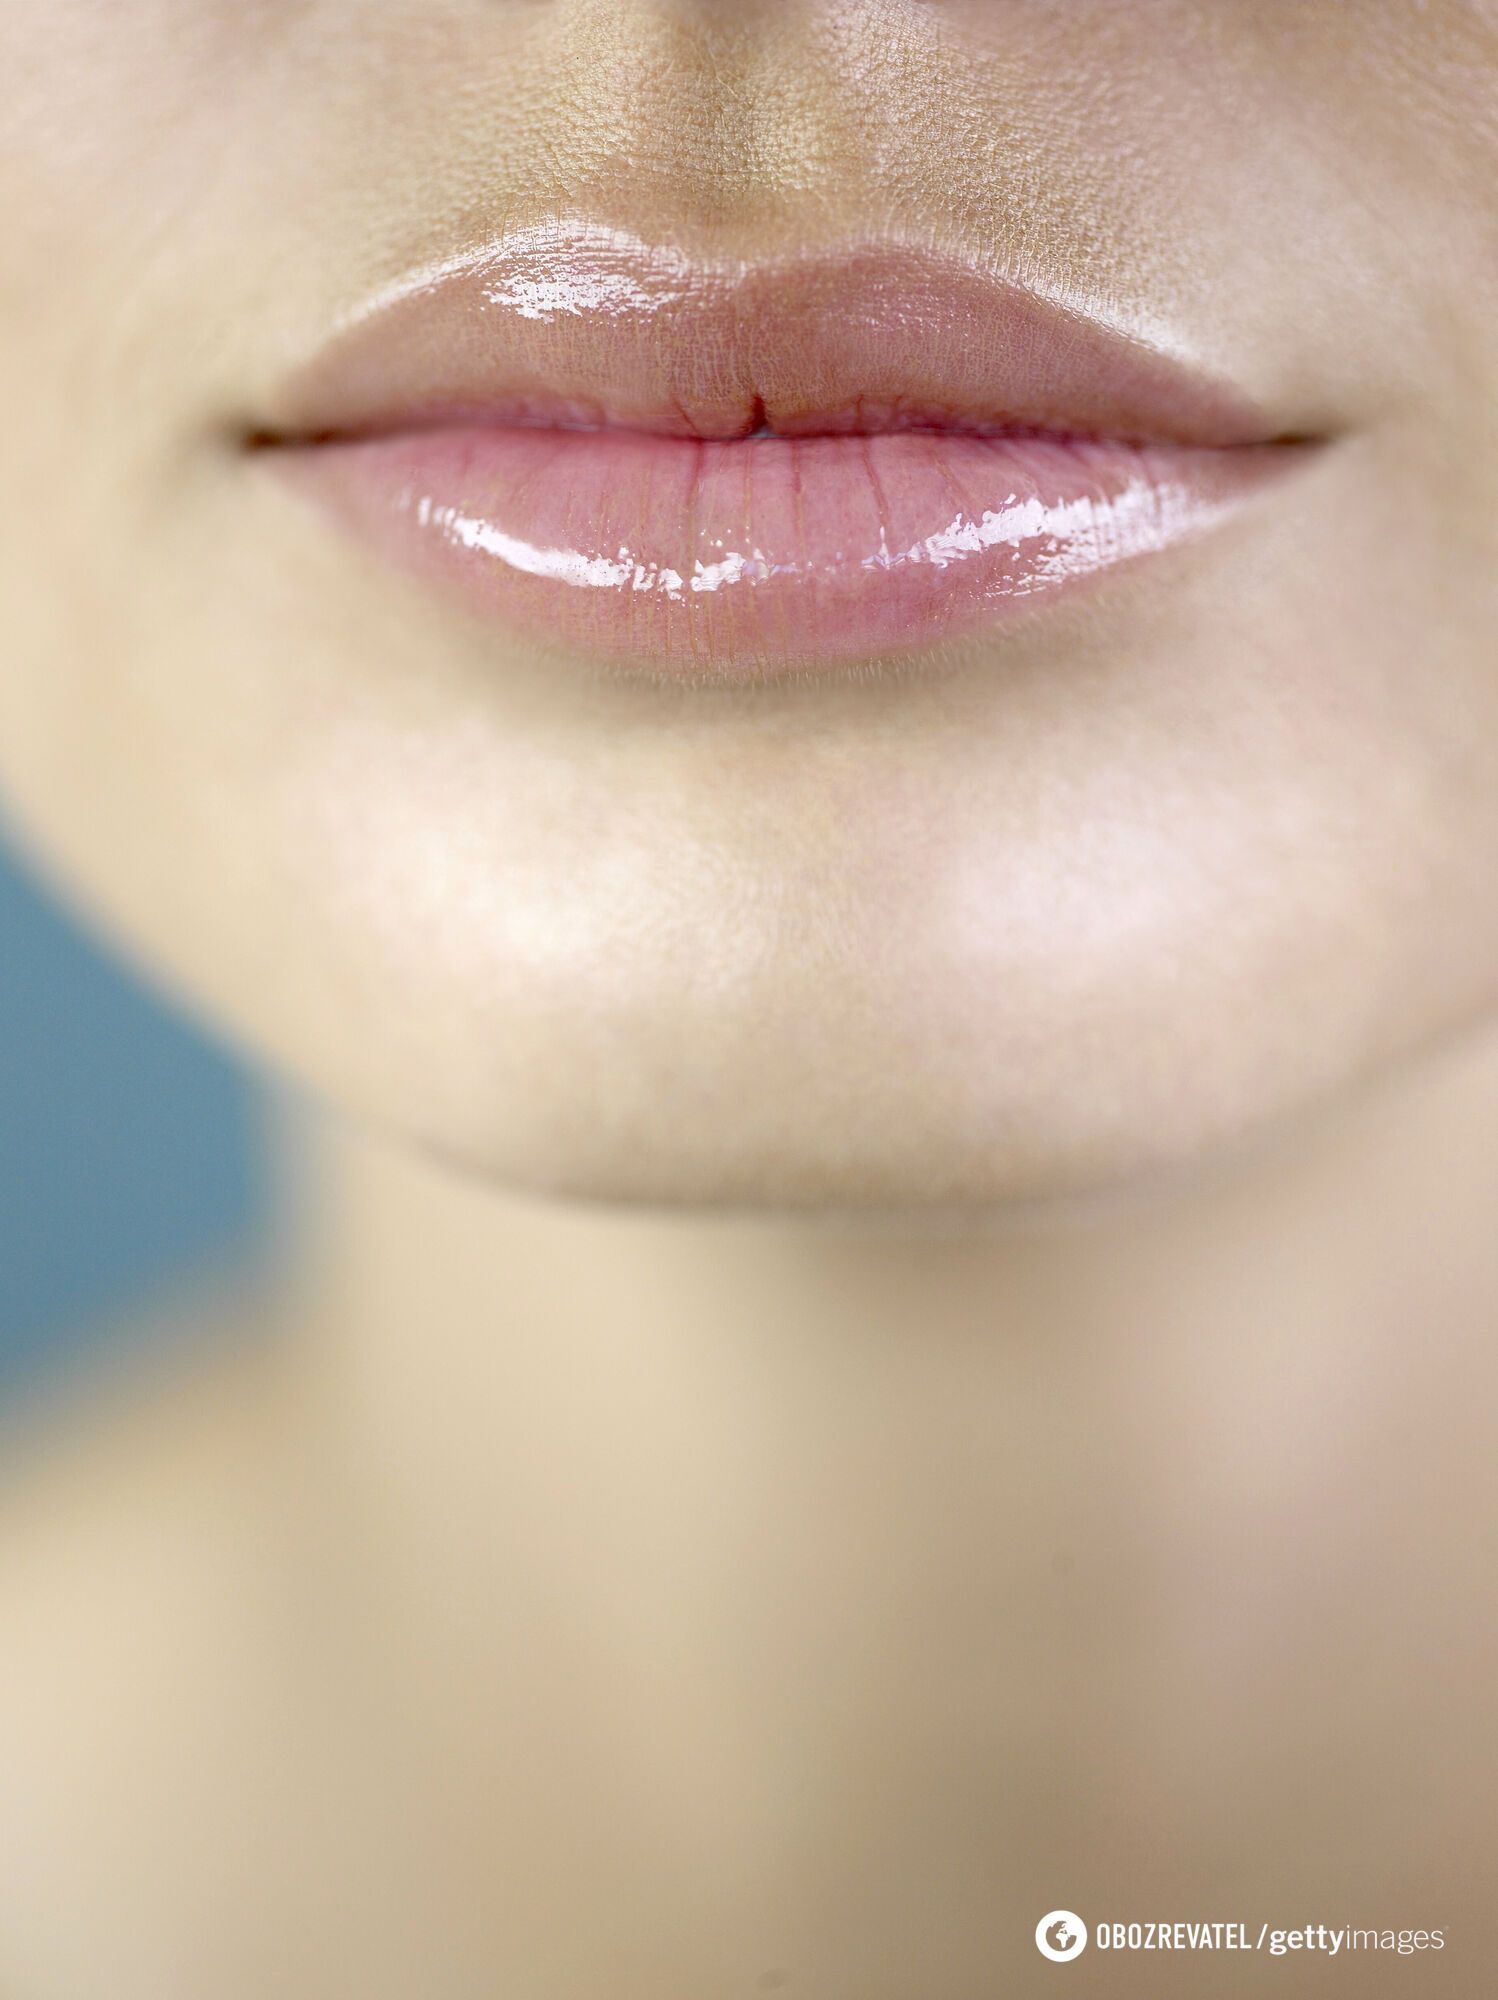 You should focus on the glossy effect when choosing a lipstick.